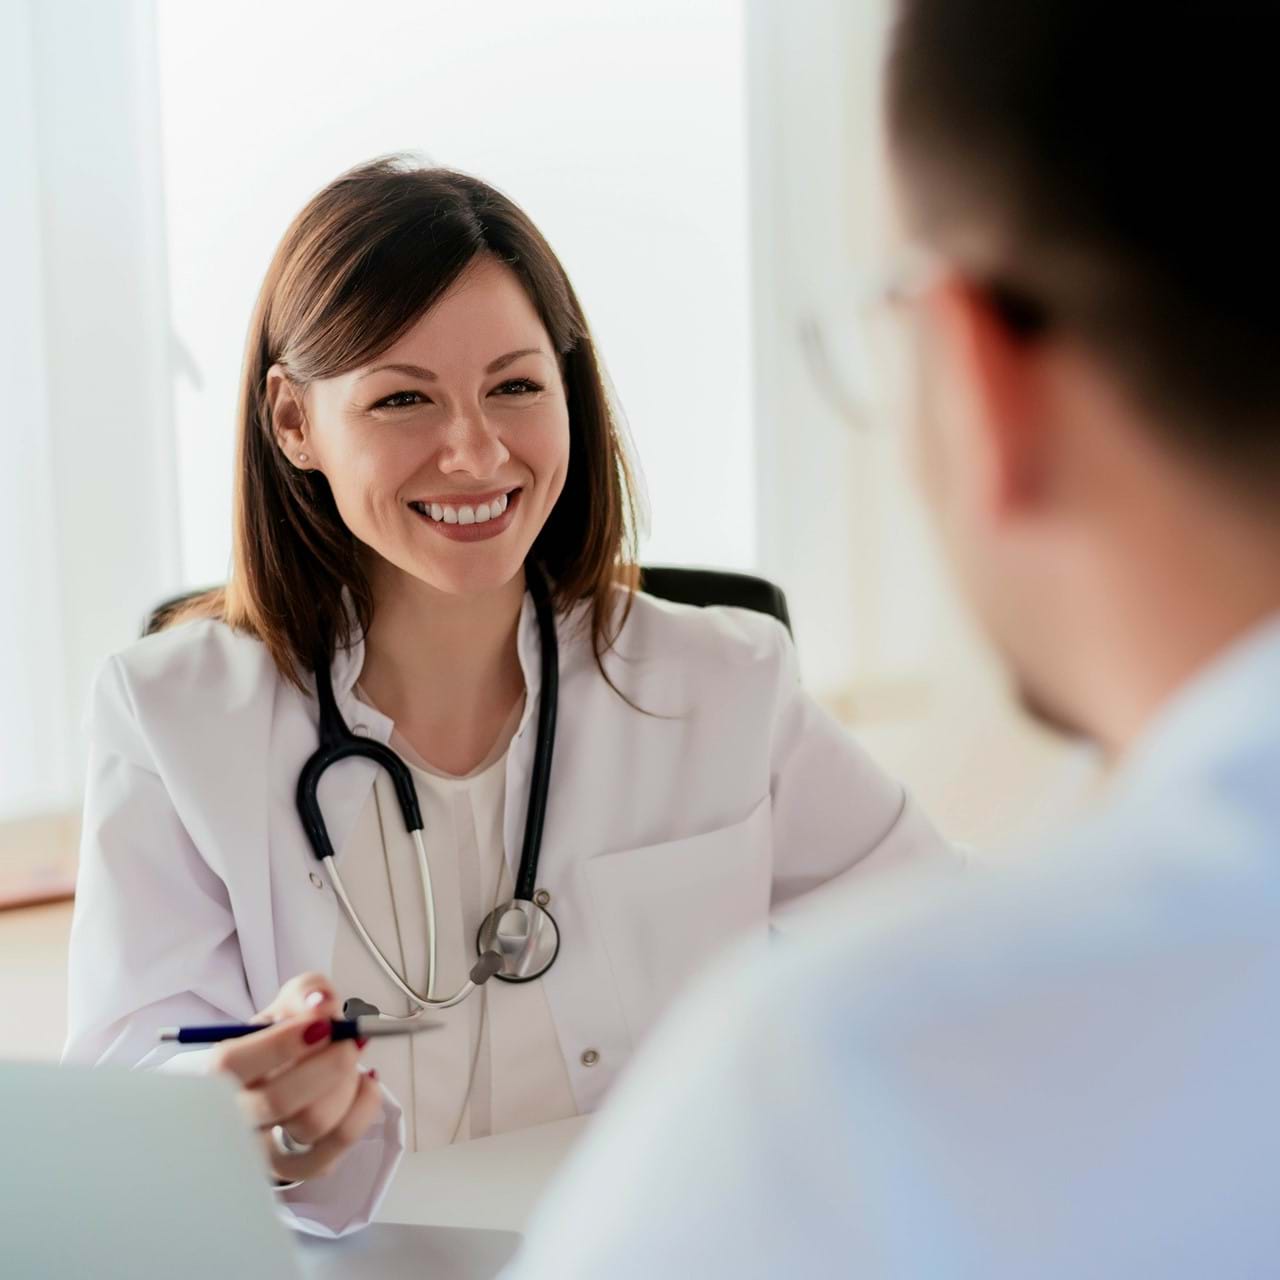 Doctor smiling at patient